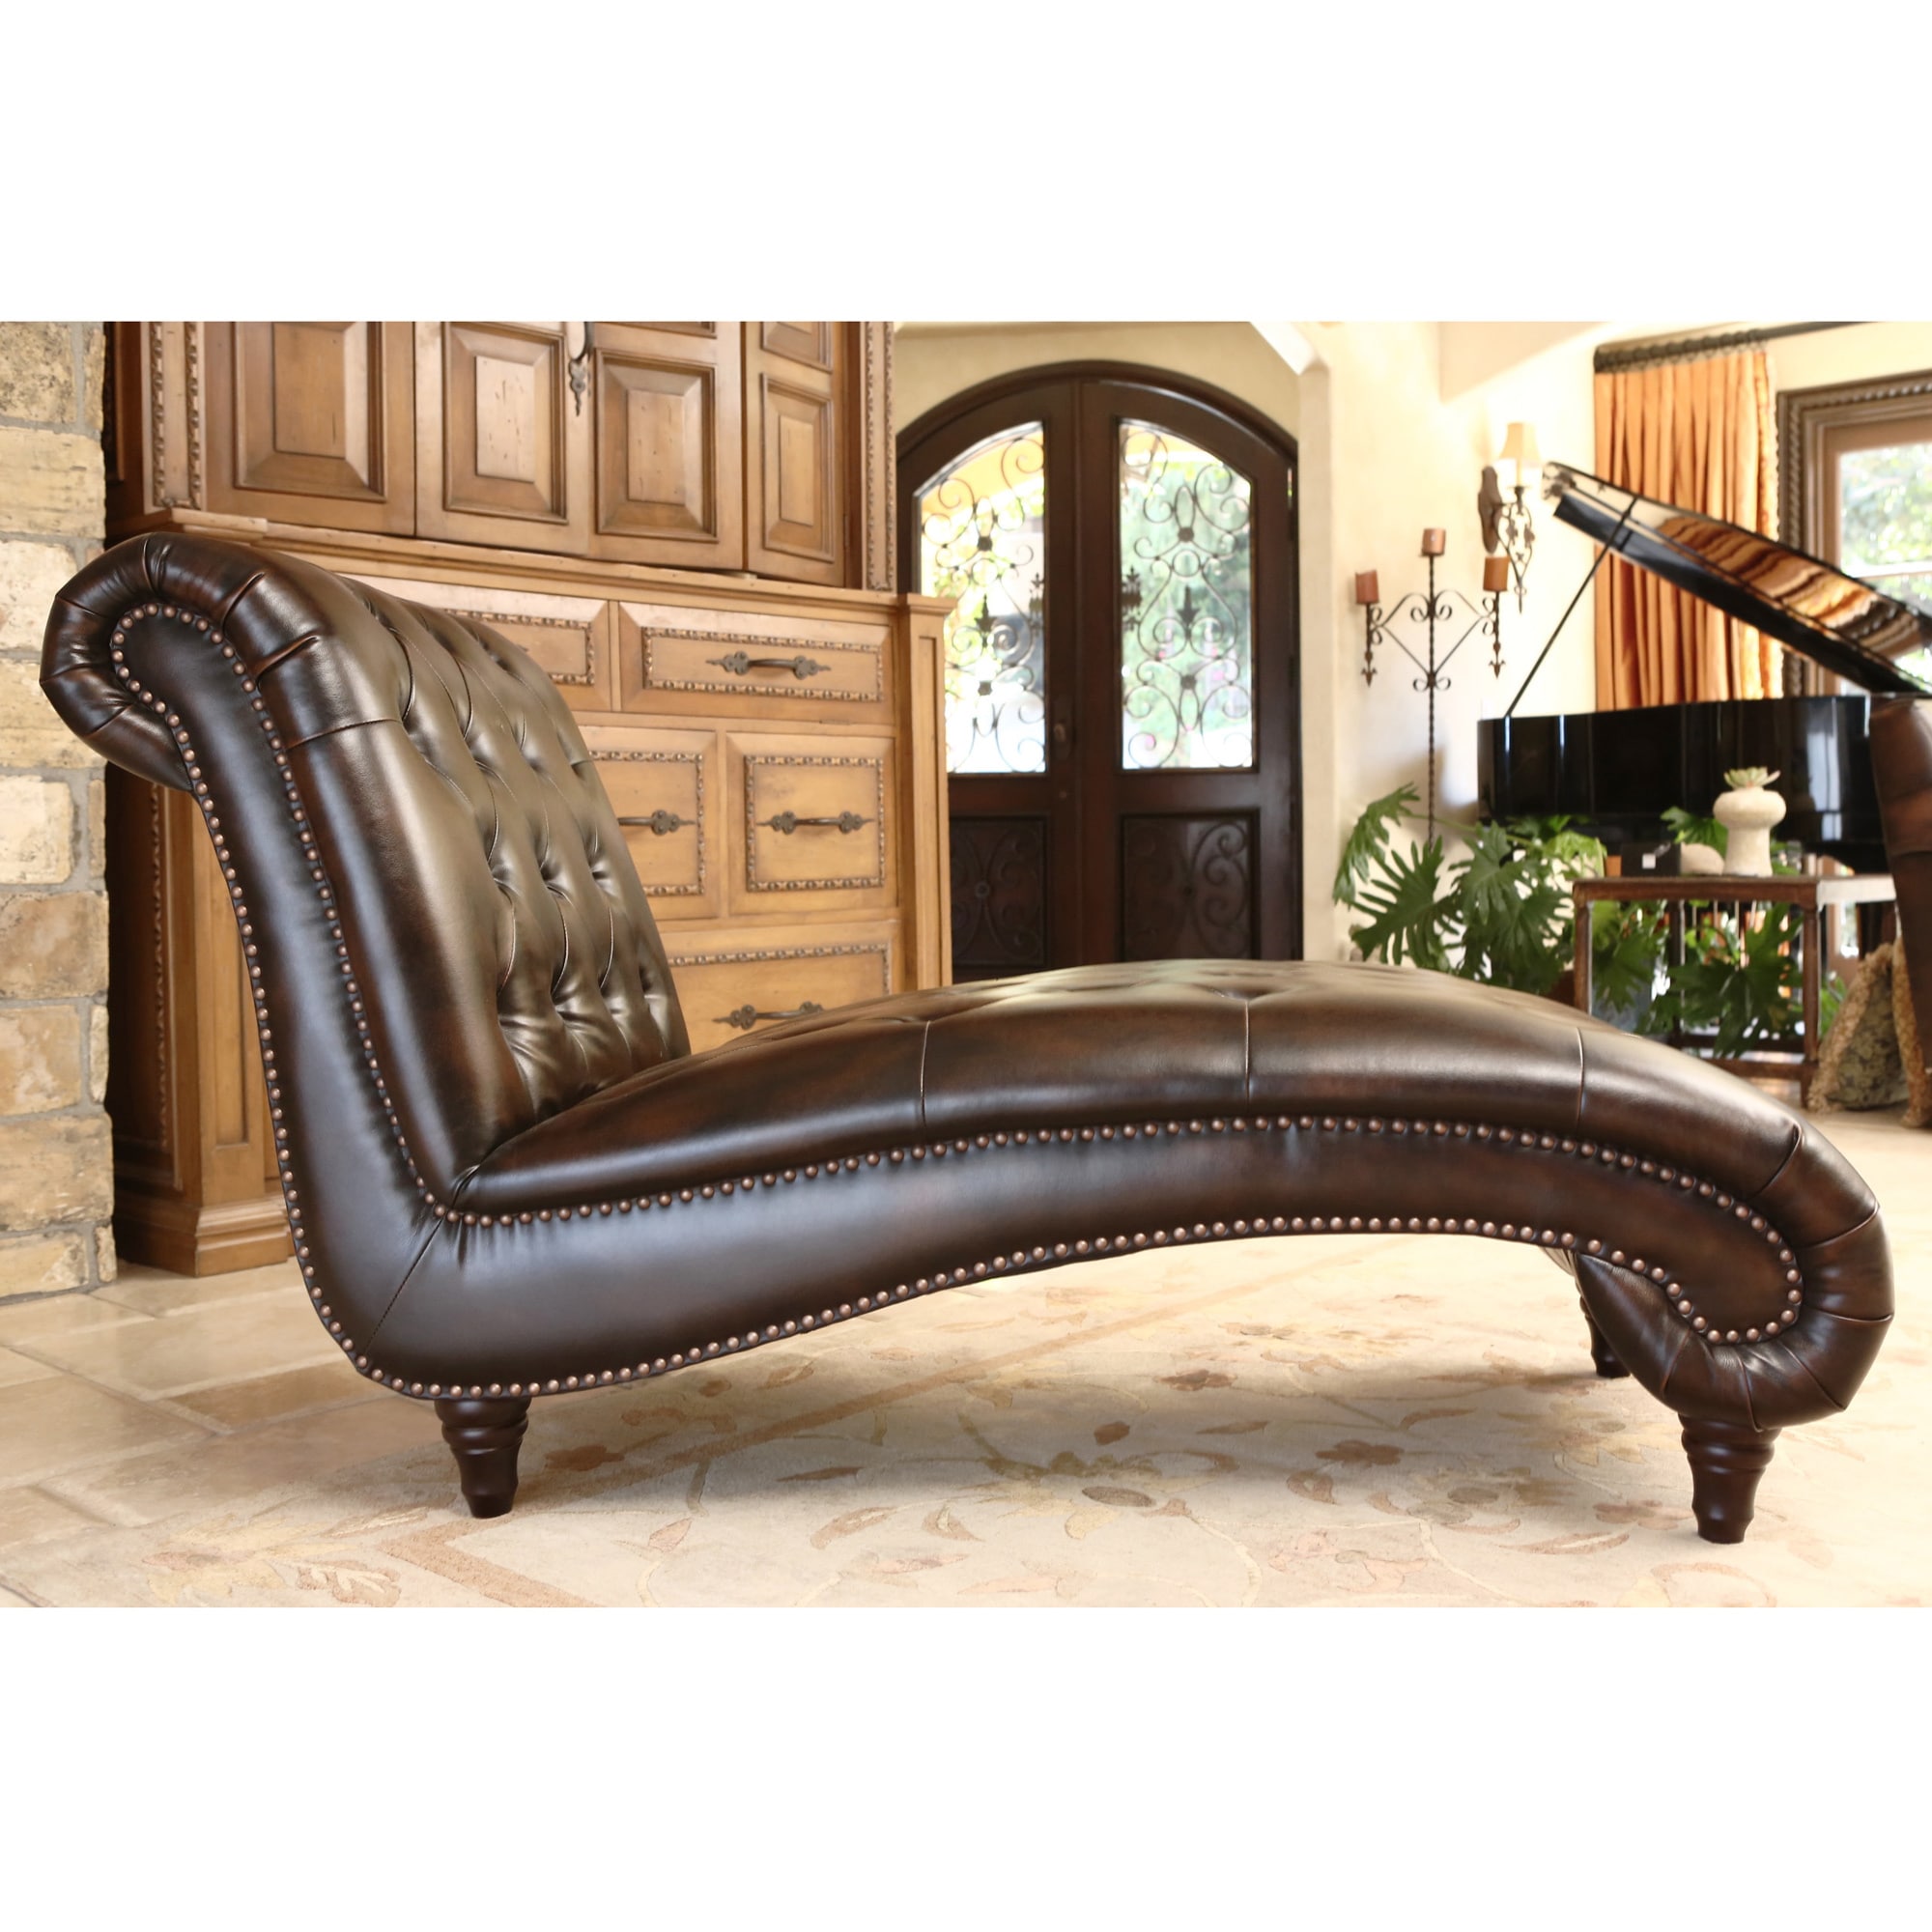 Large Chaise Lounge Chair Daybed Lounger Bonded Brown Leather Armless 7441